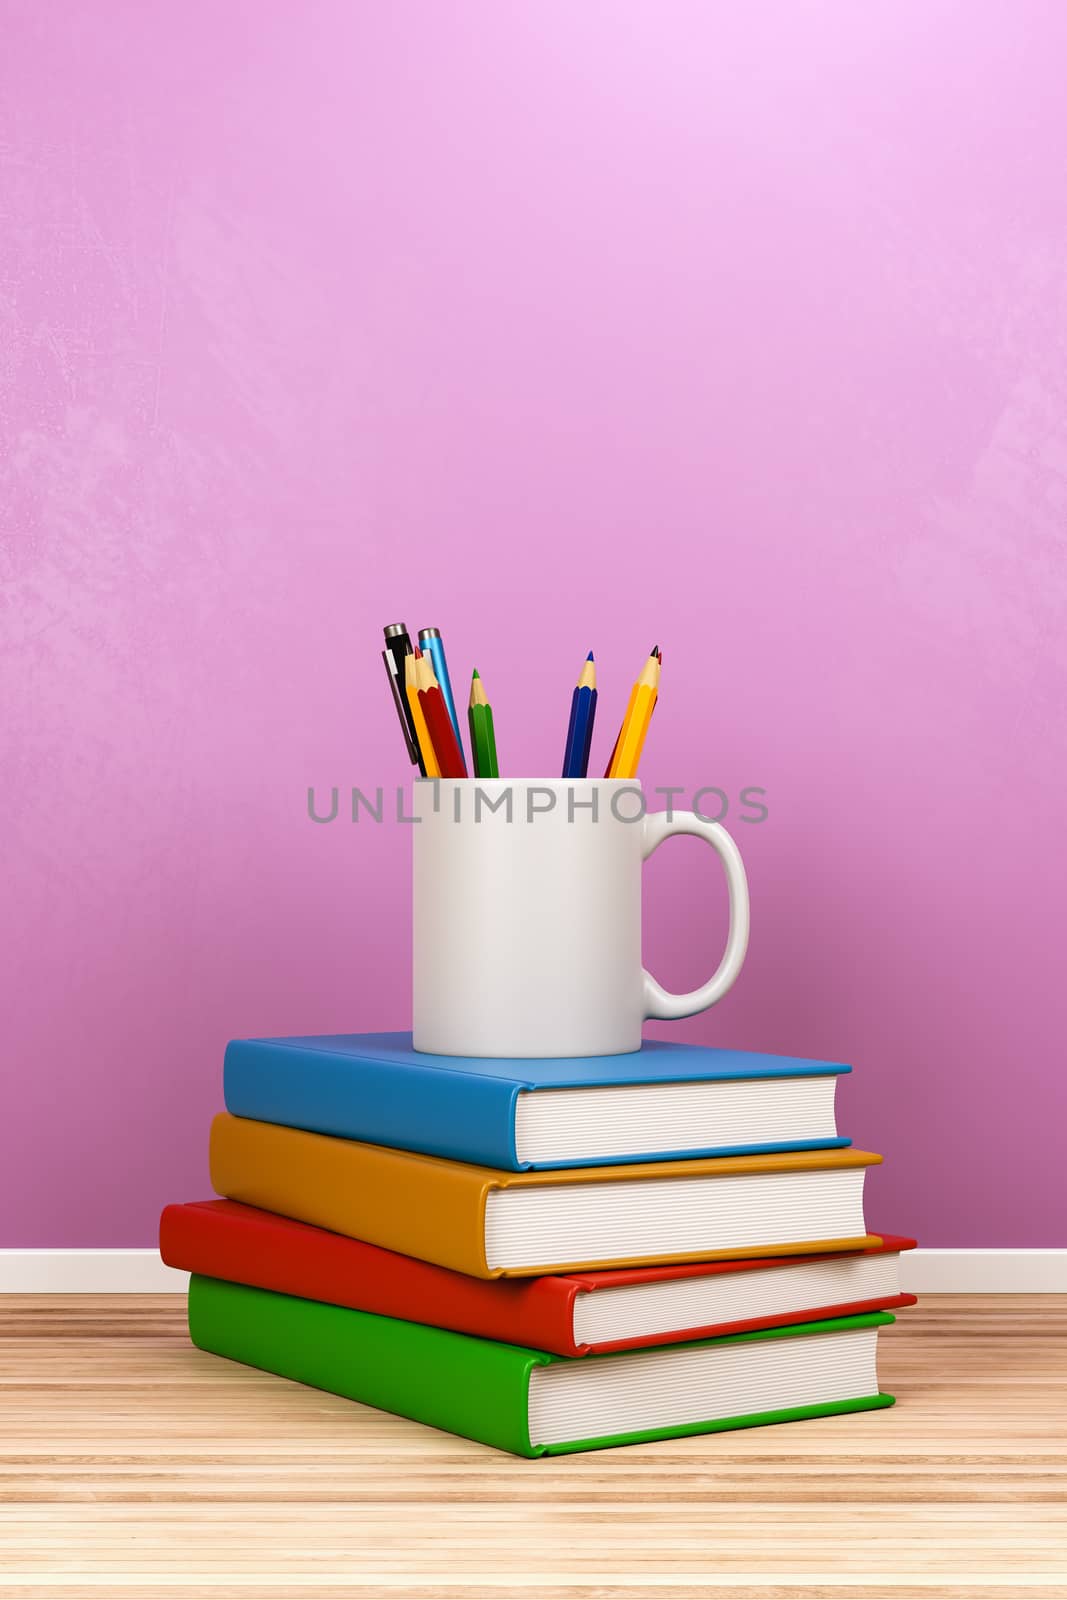 Stack of Books and Stationery Supplies on Wooden Floor in the Room with Copyspace 3D Render